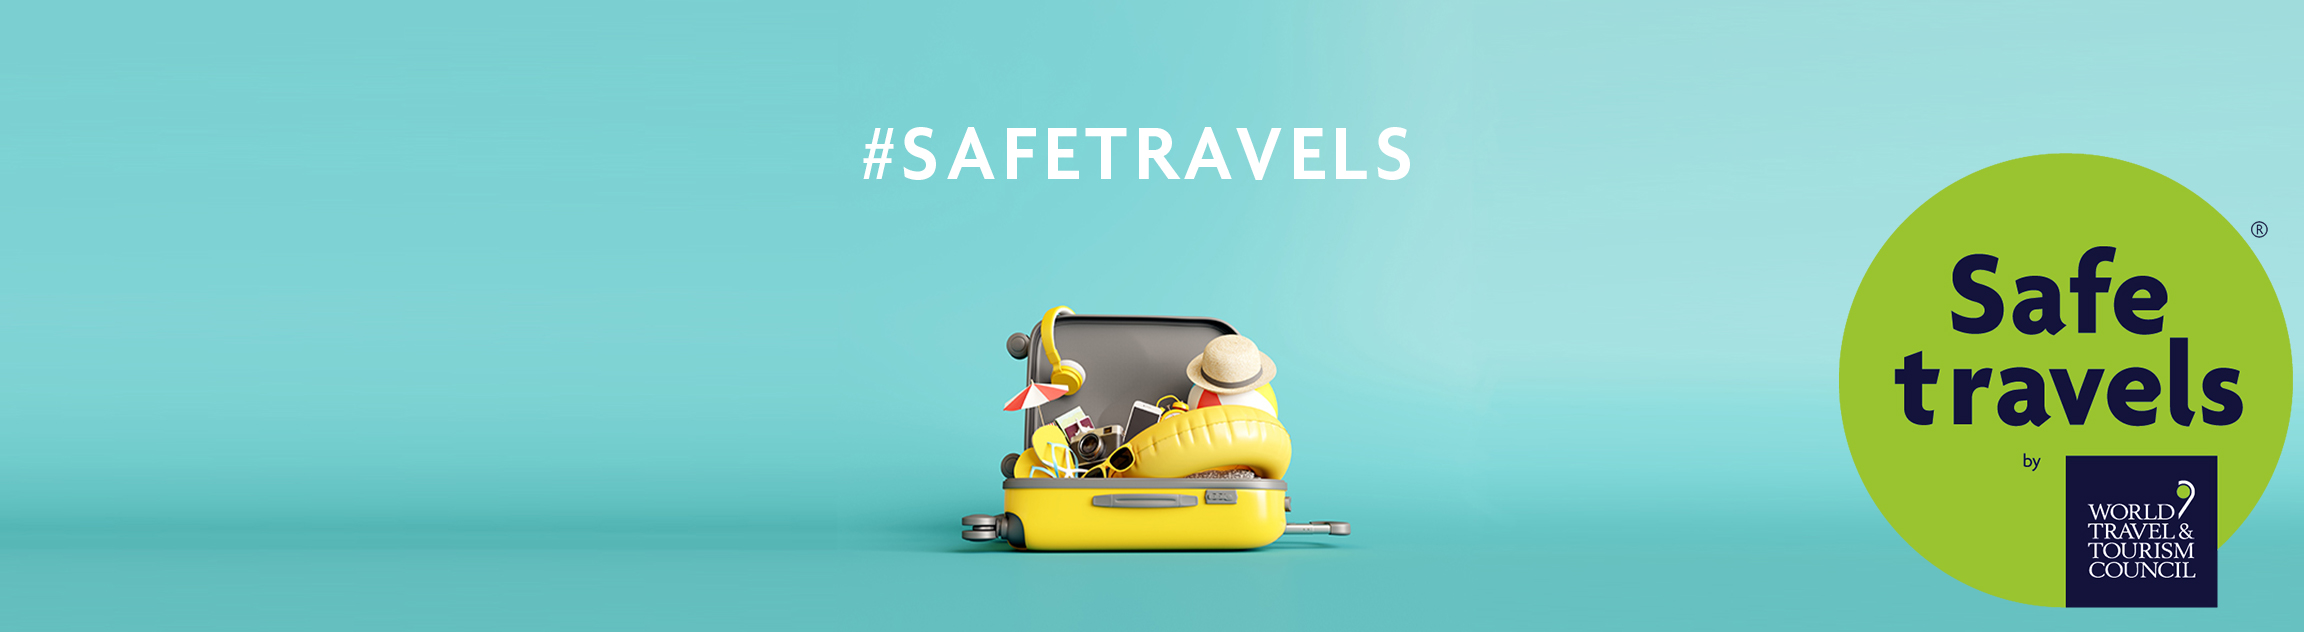 SafeTravels with R stamp